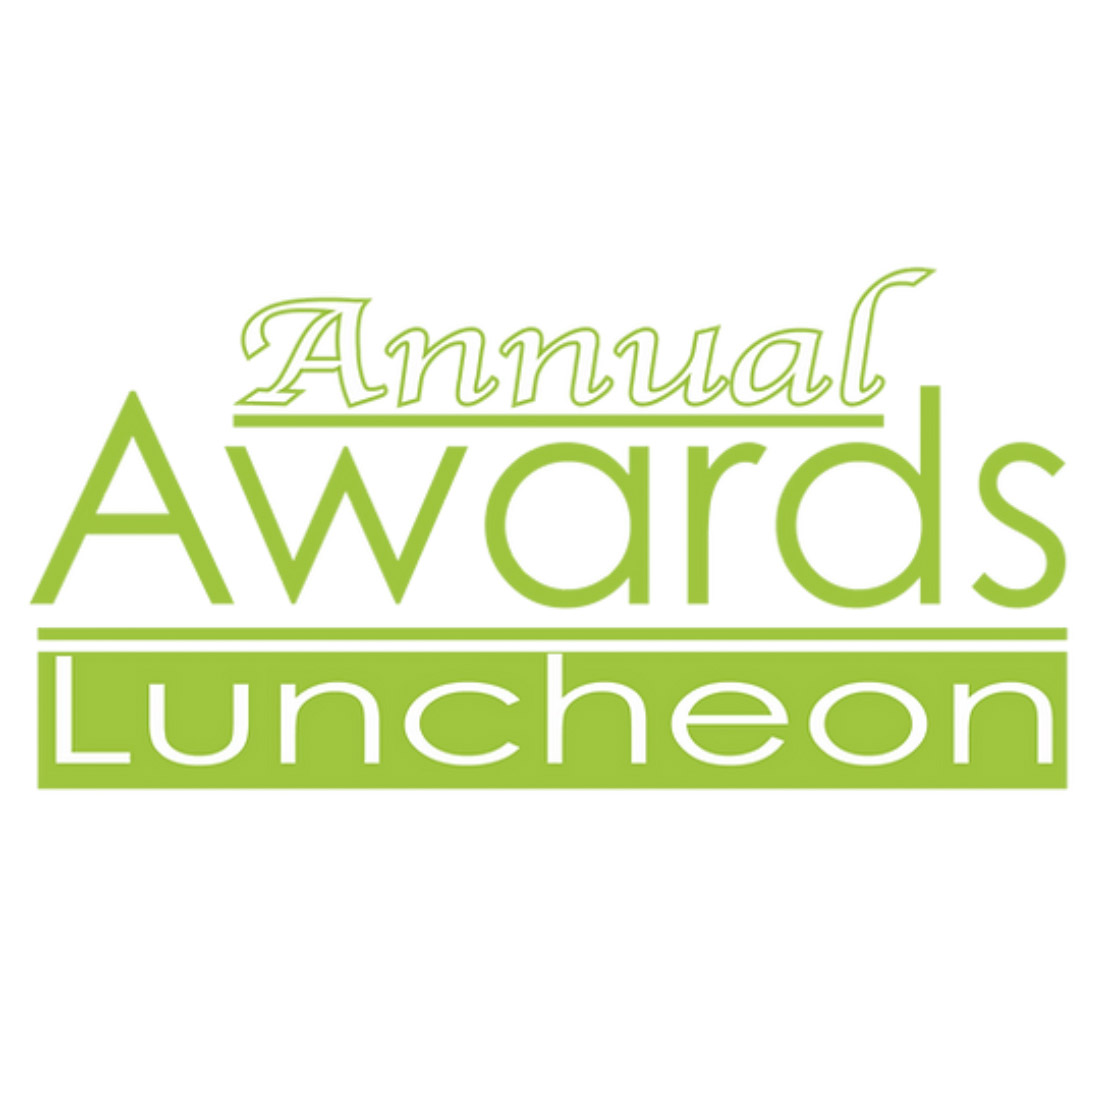 Annual Awards Luncheon